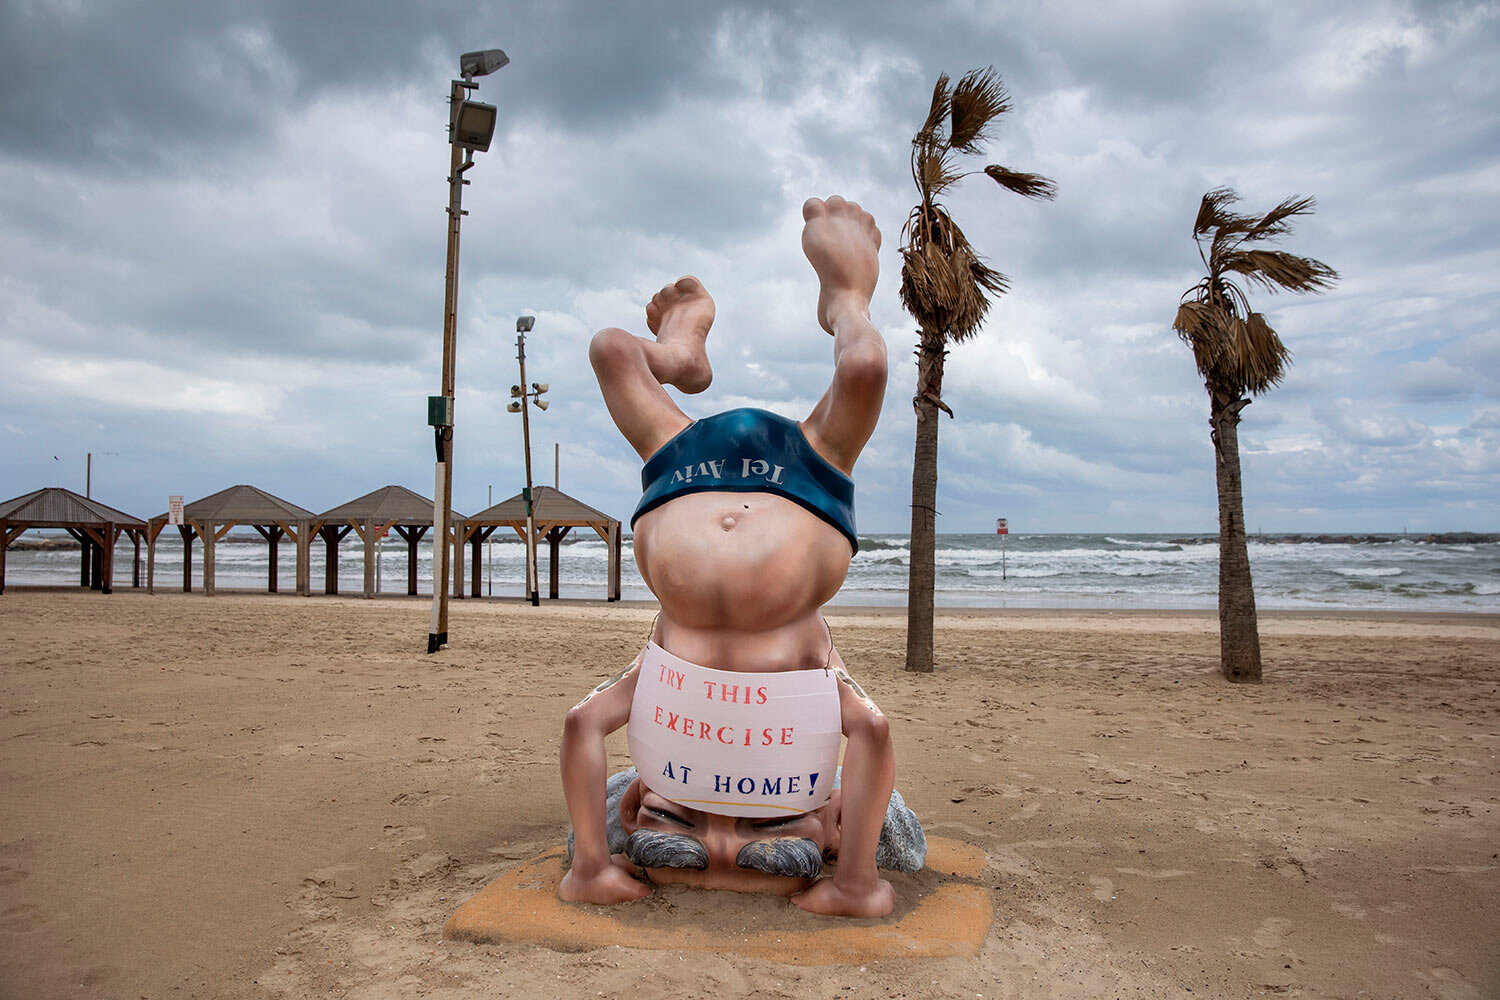  A sign calling people to stay home to reduce the spread of the new coronavirus is placed on a statue of the first Israeli Prime Minister David Ben Gurion at a beach in Tel Aviv, Israel, March 20, 2020. (AP Photo/Oded Balilty) 